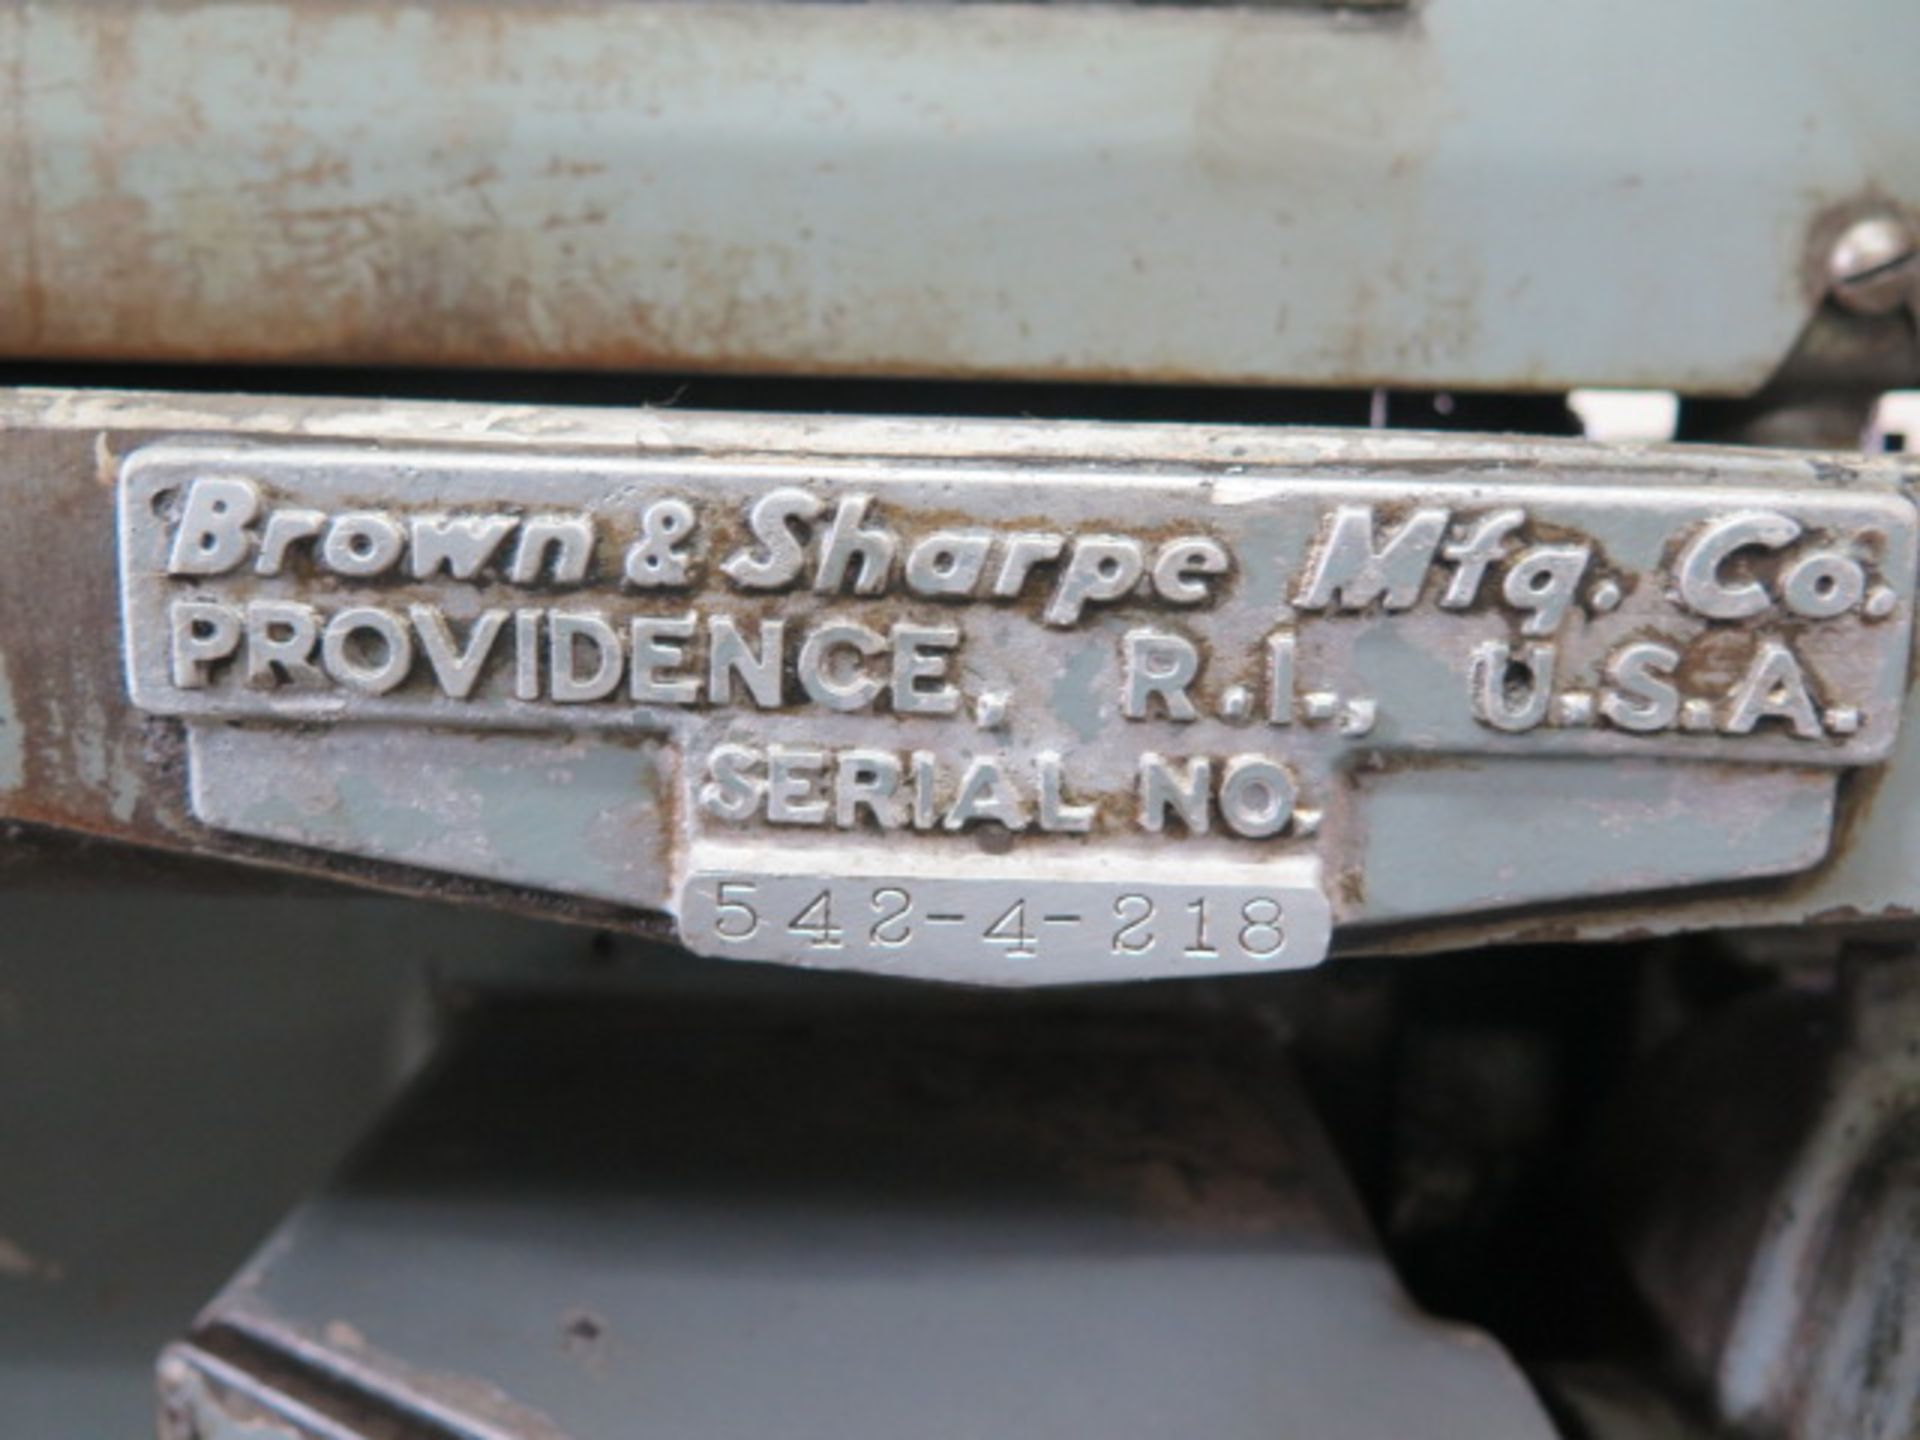 Brown & Sharpe No. 4 Automatic Screw Machine w/ 3-Cross Slides, Rotary Style Turret, SOLD AS IS - Image 14 of 14